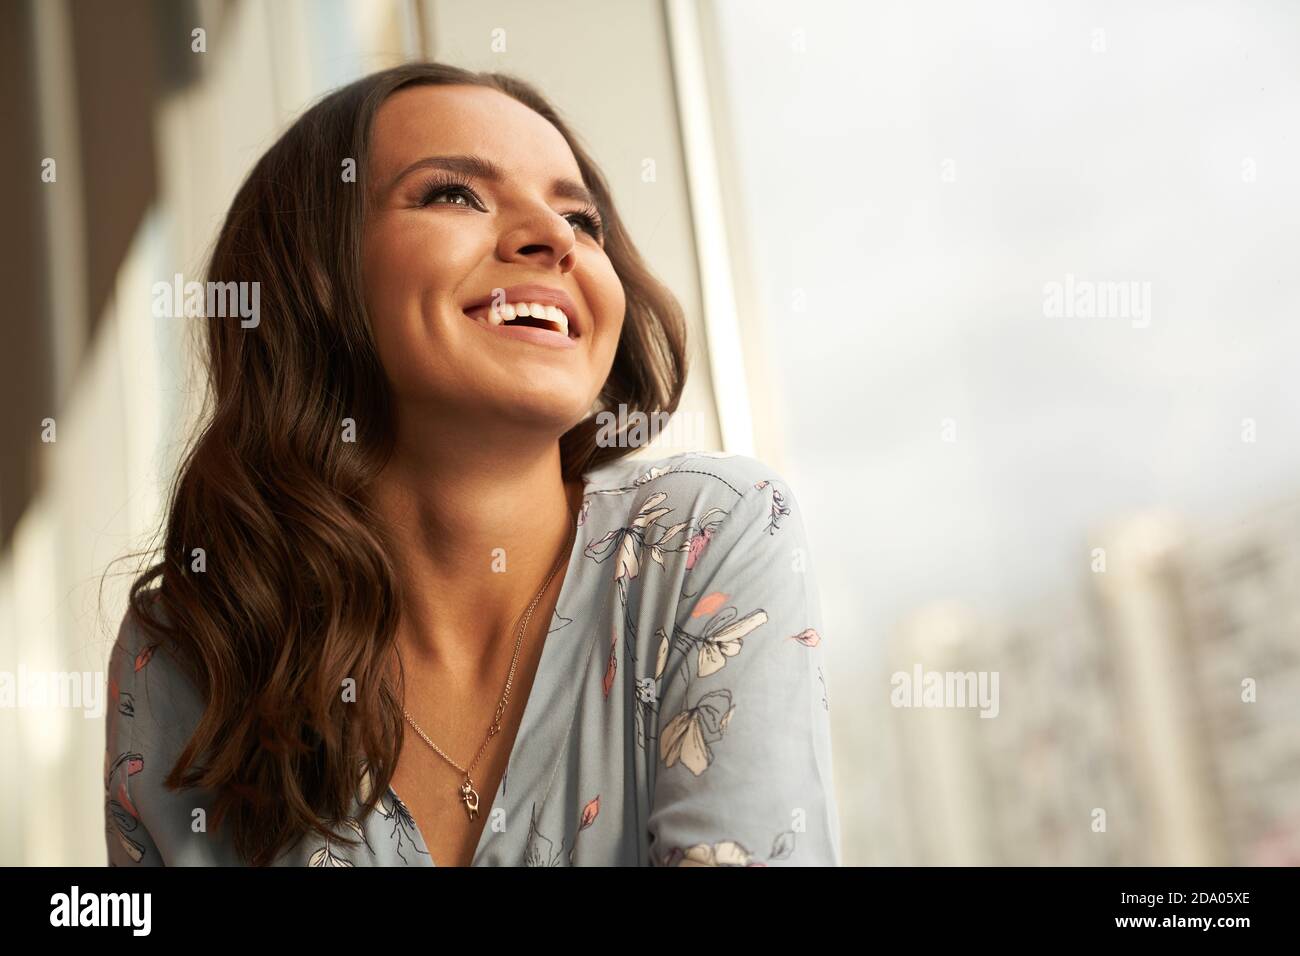 A beautiful young woman happy and smiling looks towards the window, the girl has perfect skin and a snow-white smile Stock Photo